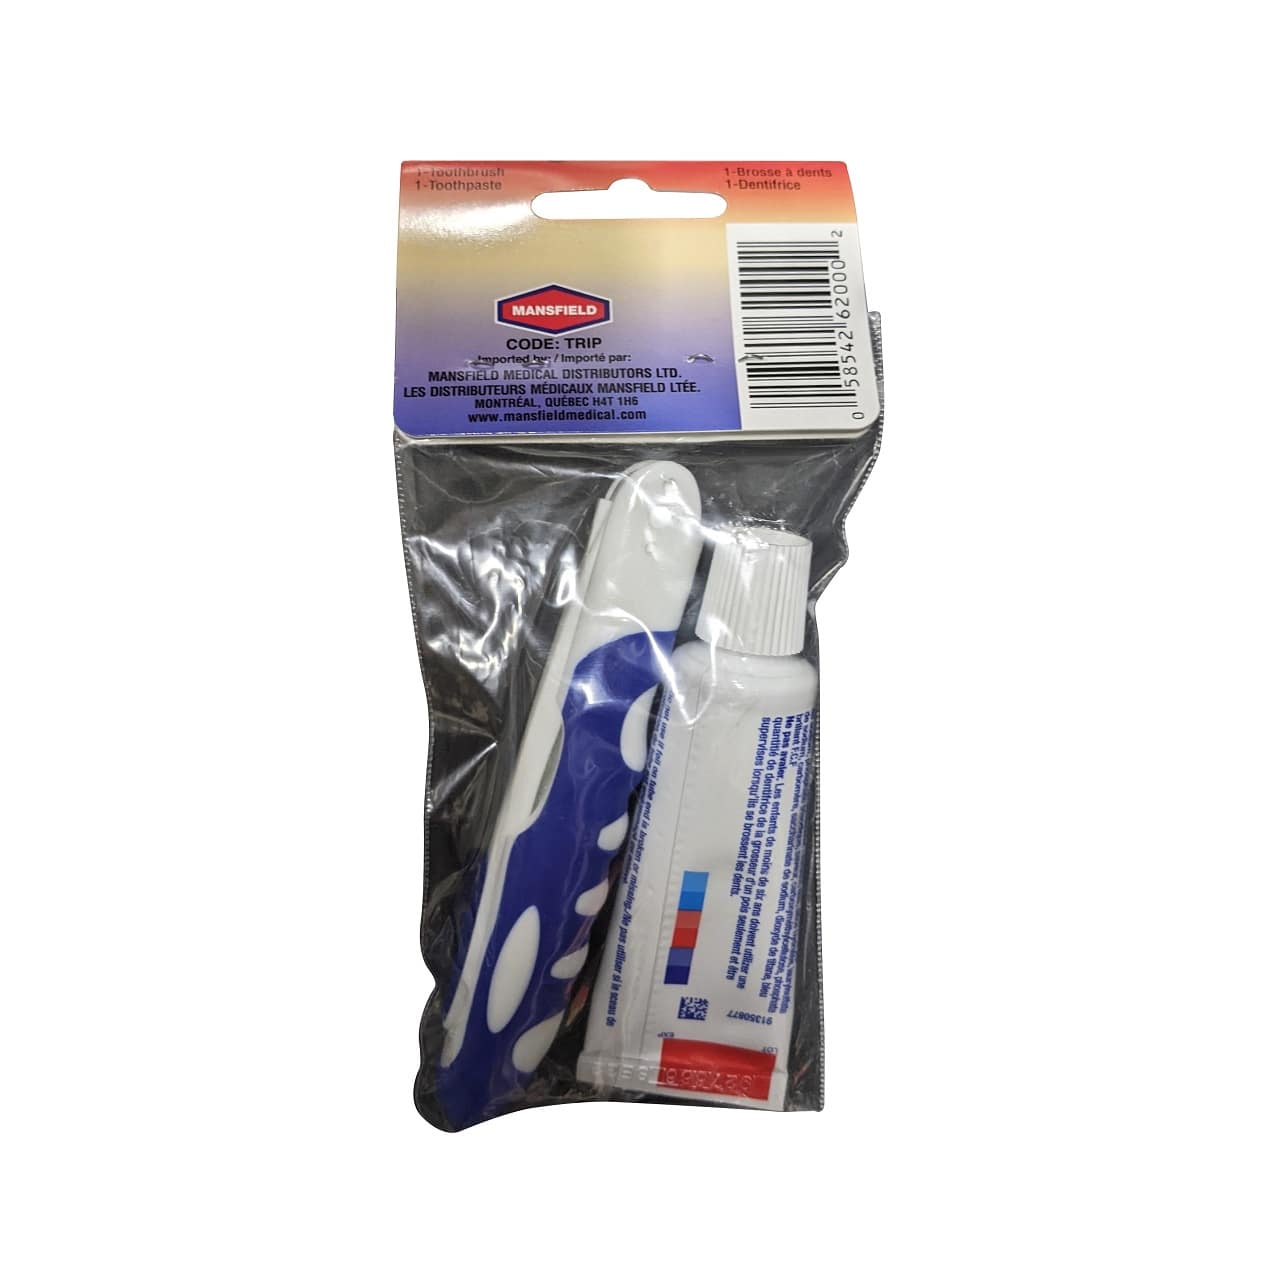 UPC for Mansfield Travel Accessories Toothbrush and Toothpaste